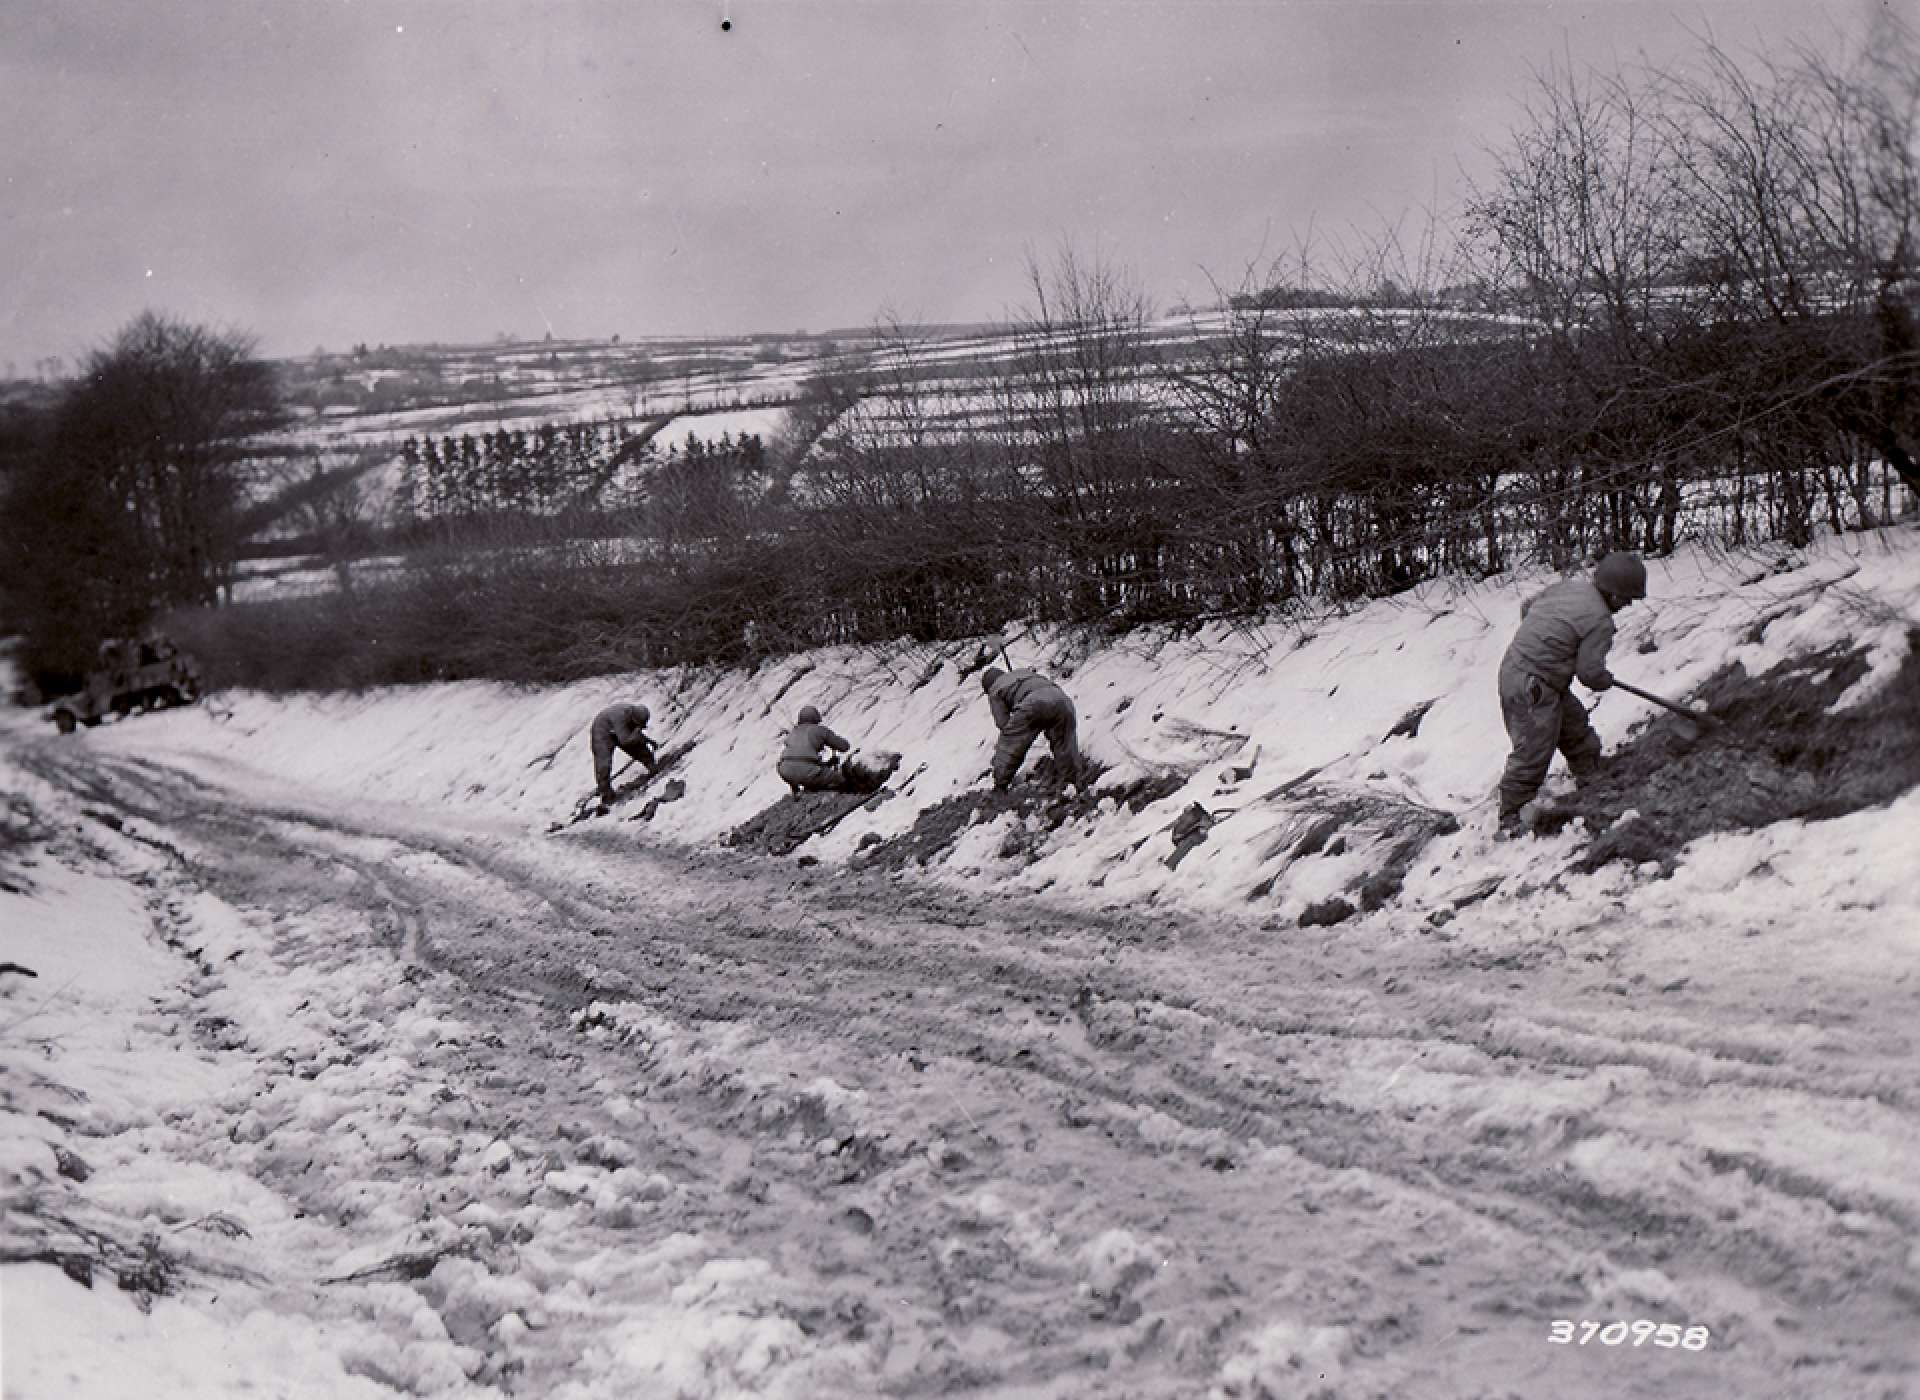 2nd Infantry Division soldiers dig in on a road bank and prepare defensive positions on the end of the Elsenborn Ridge on December 20, 1944. The National WWII Museum Digital Collections.